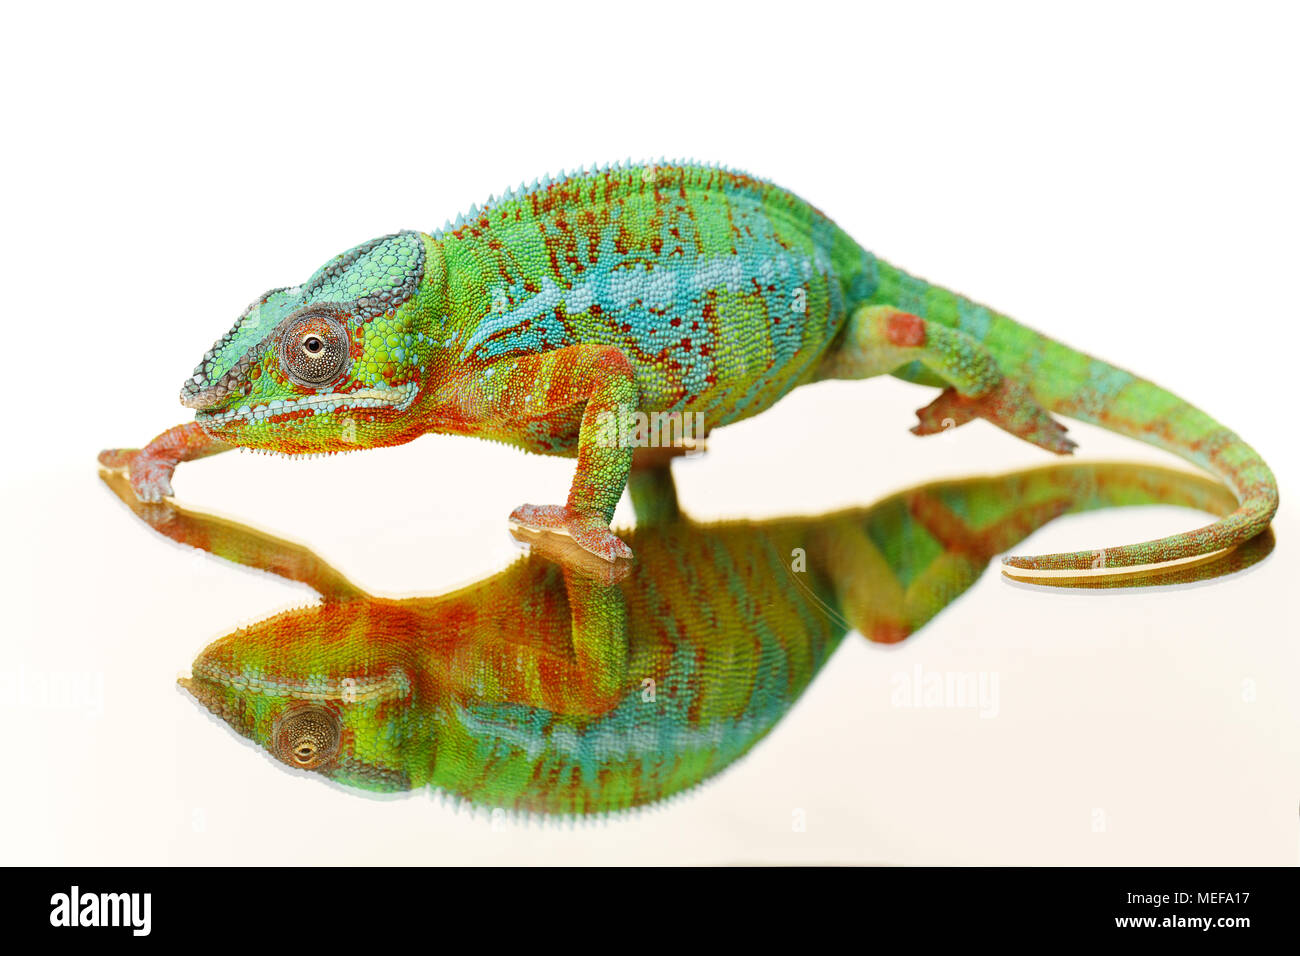 alive chameleon reptile sitting on mirror surface. studio shot isolated on white background. copy space. Stock Photo